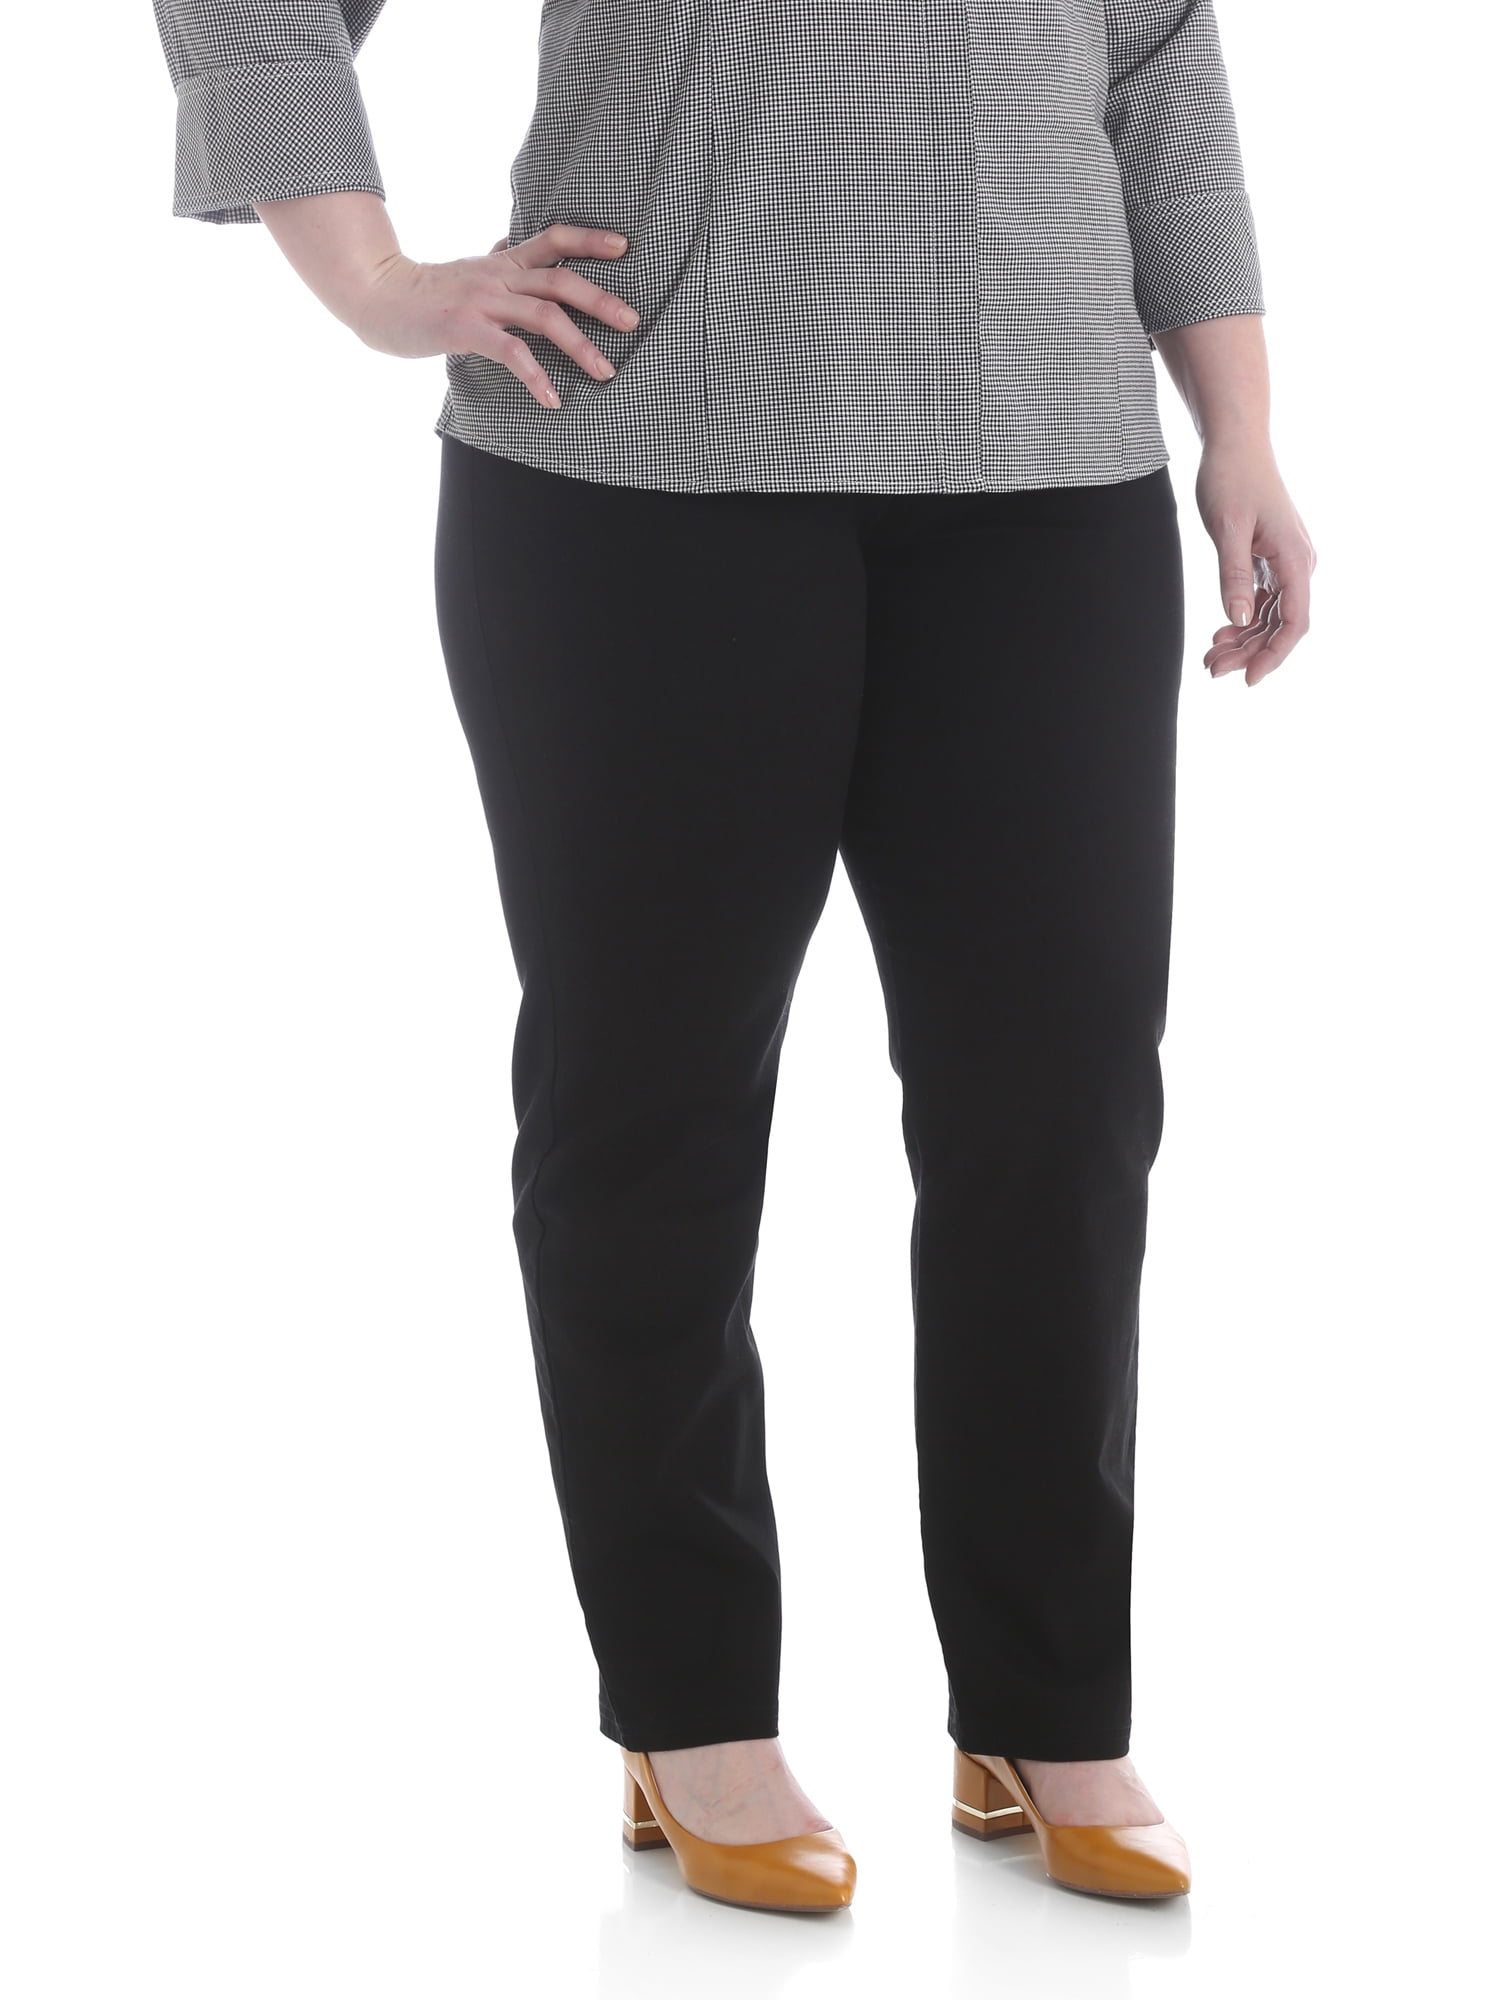 Plus Size Simply Comfort Twill Pant 